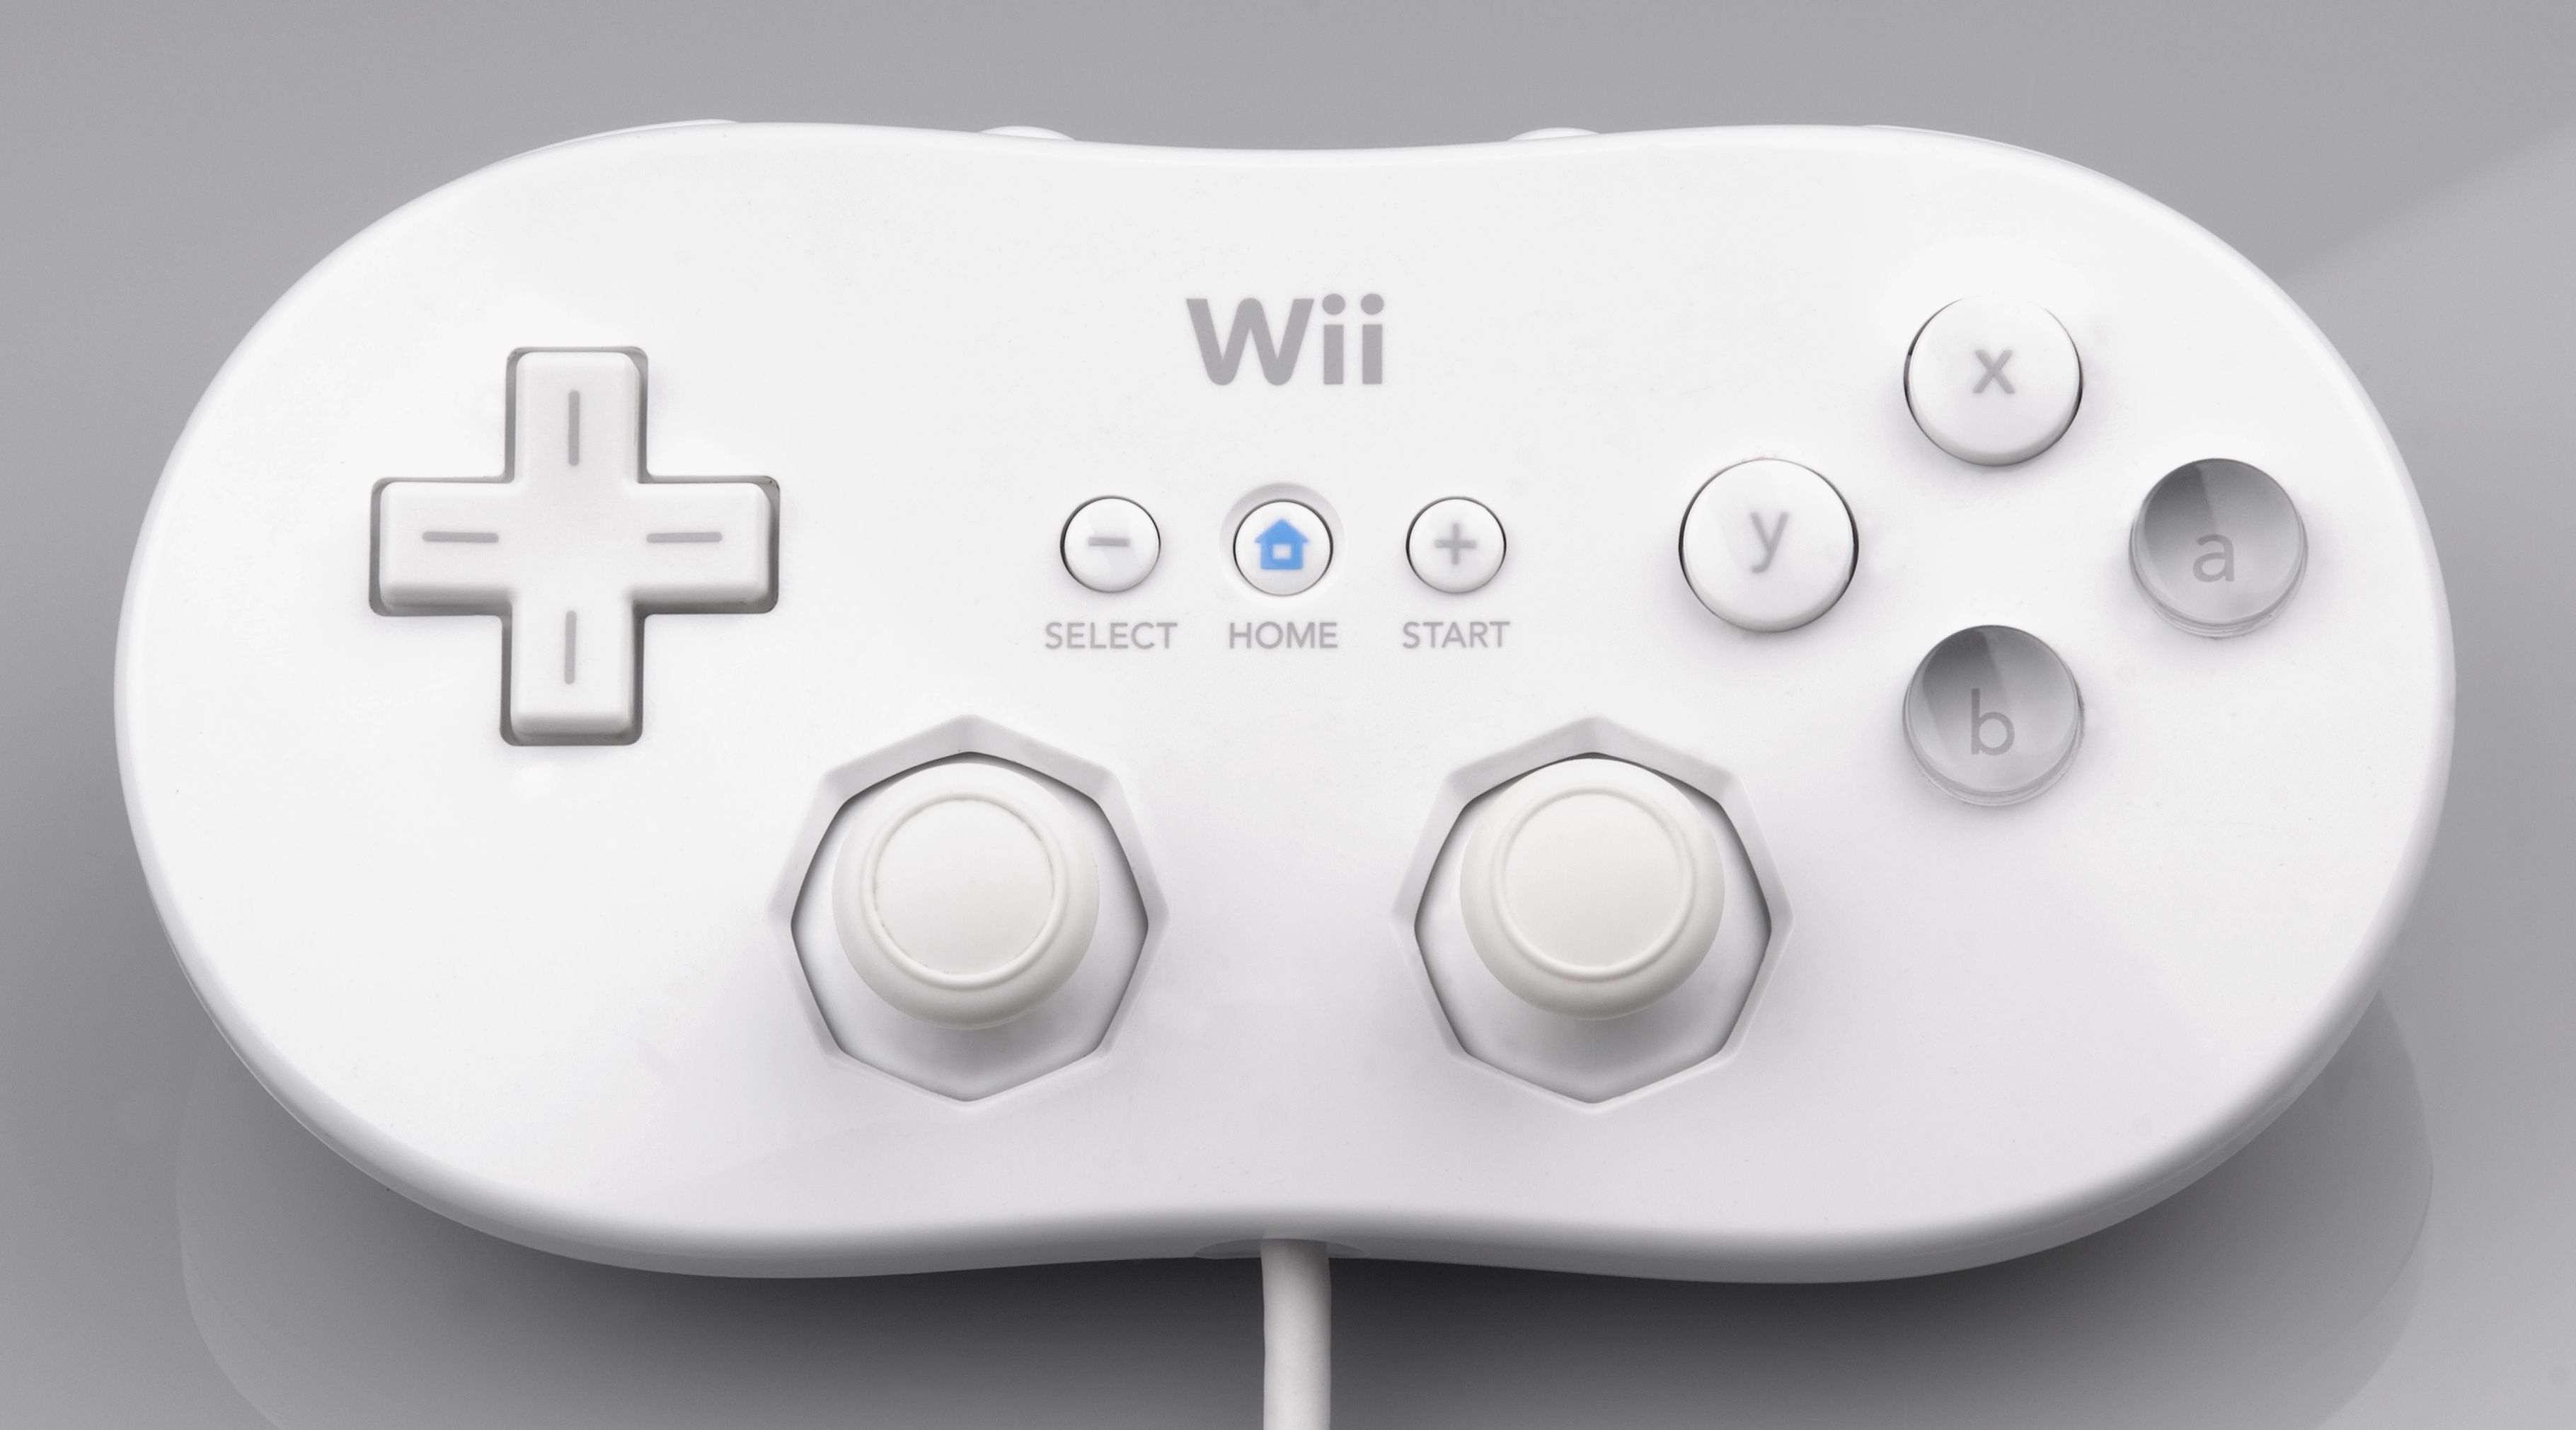 can you play wii games on wii u without wii remote